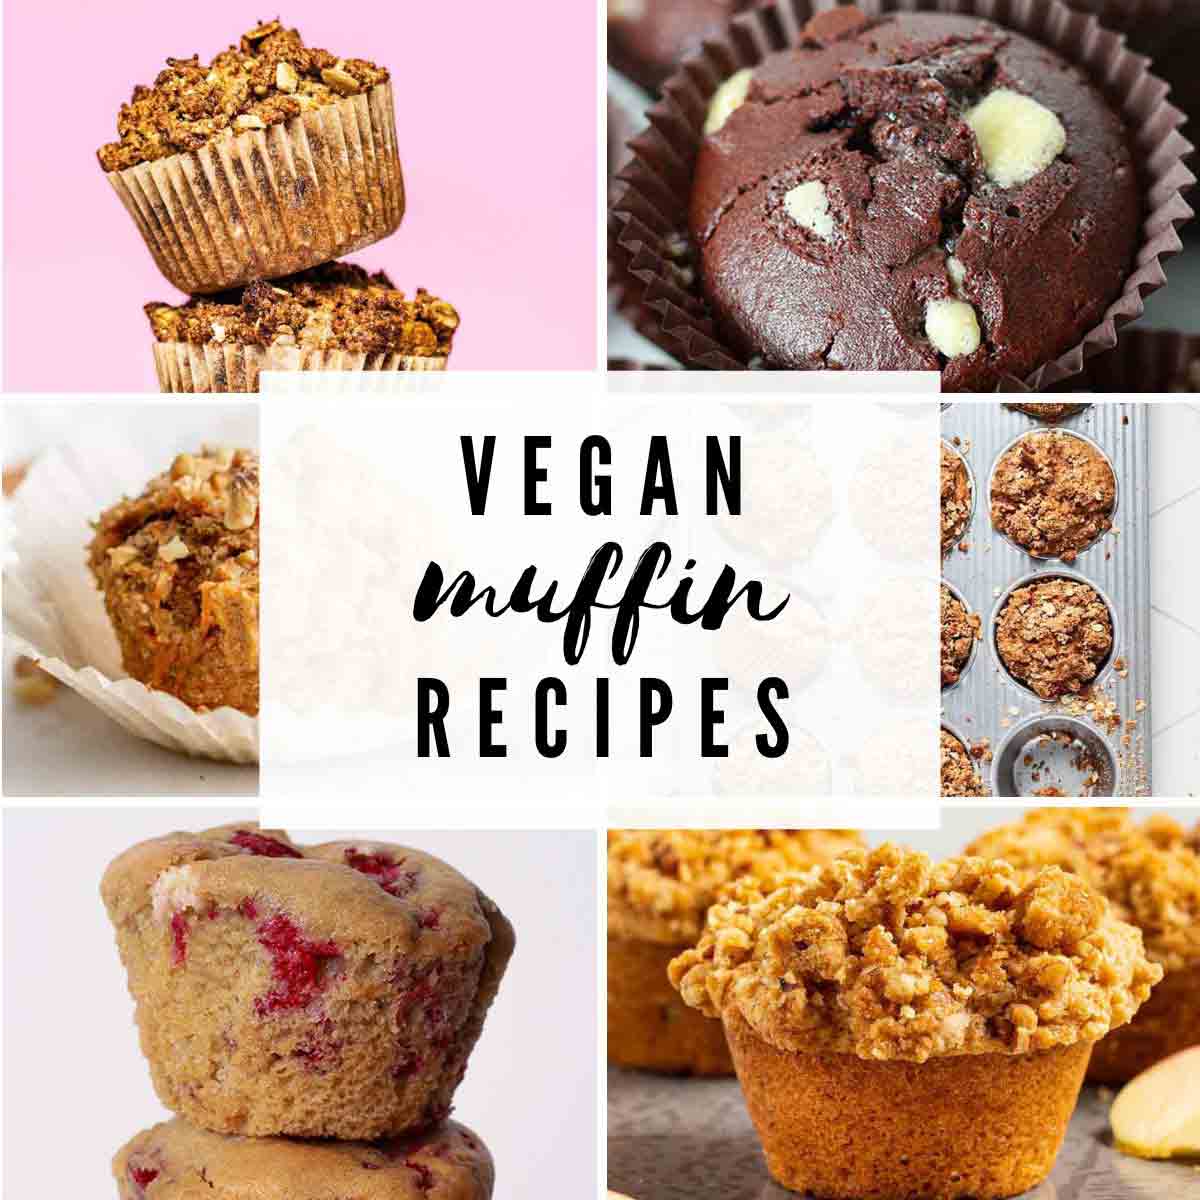 6 Muffin Images With Text Overlay That Reads 'vegan Muffin Recipes'